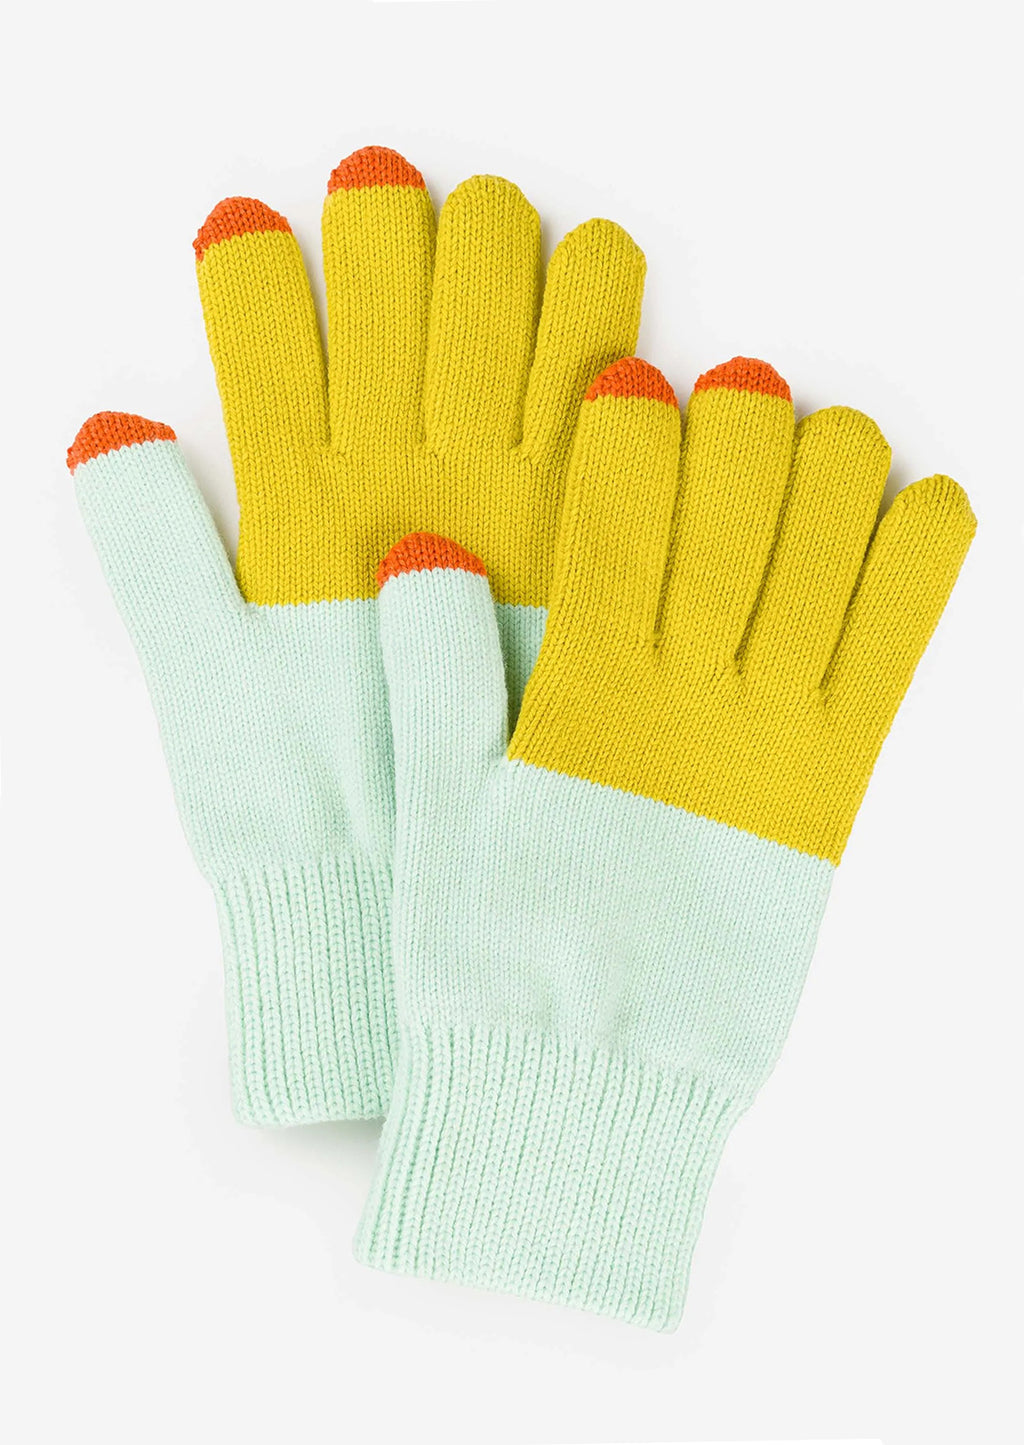 Aqua / Chartreuse: A colorblock pair of knit yarn gloves in aqua and chartreuse with orange tips.